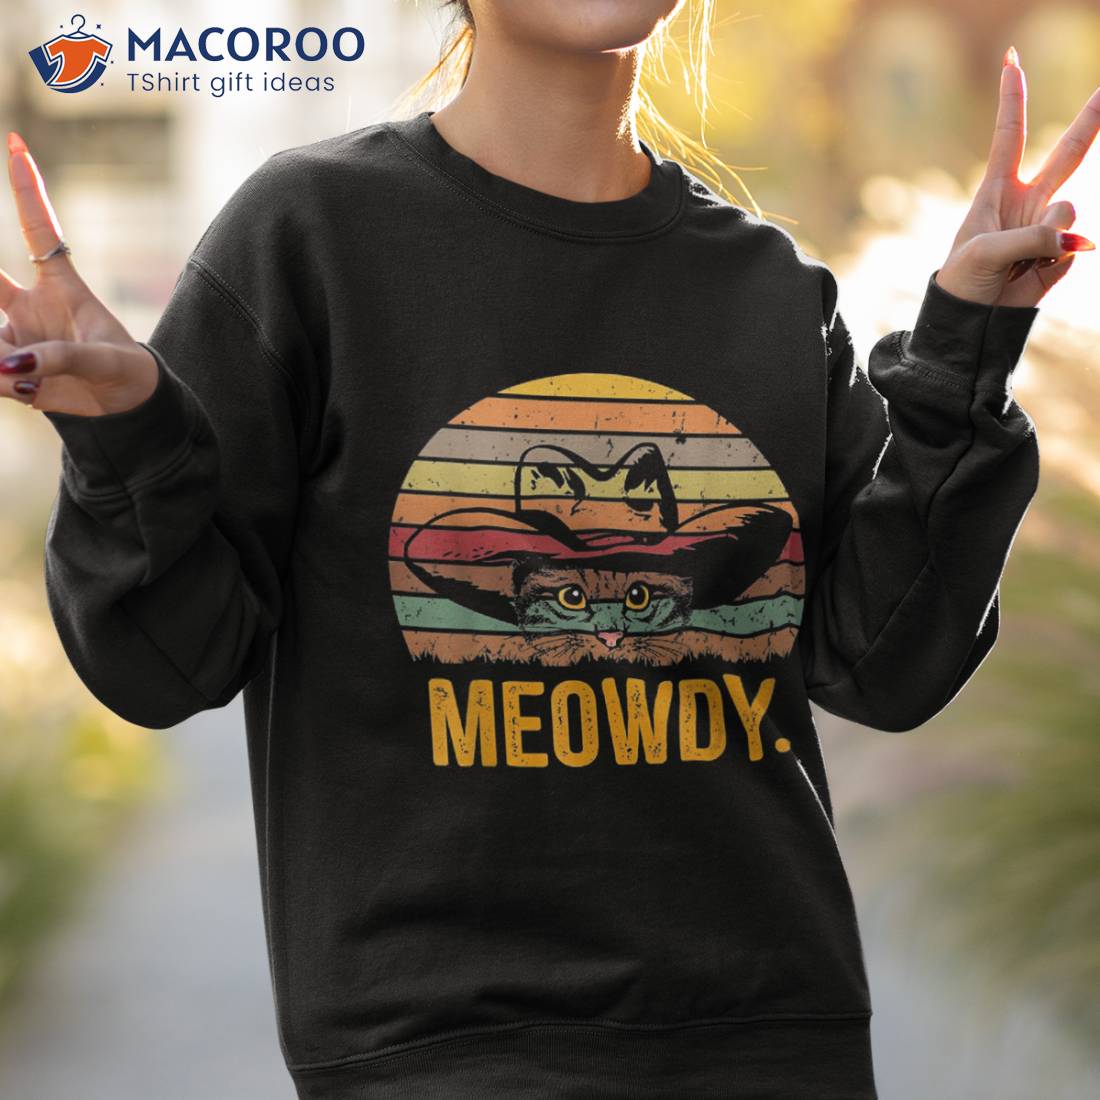 Meowdy Funny Mashup Between Meow And Howdy - Love Cat Meme Shirt